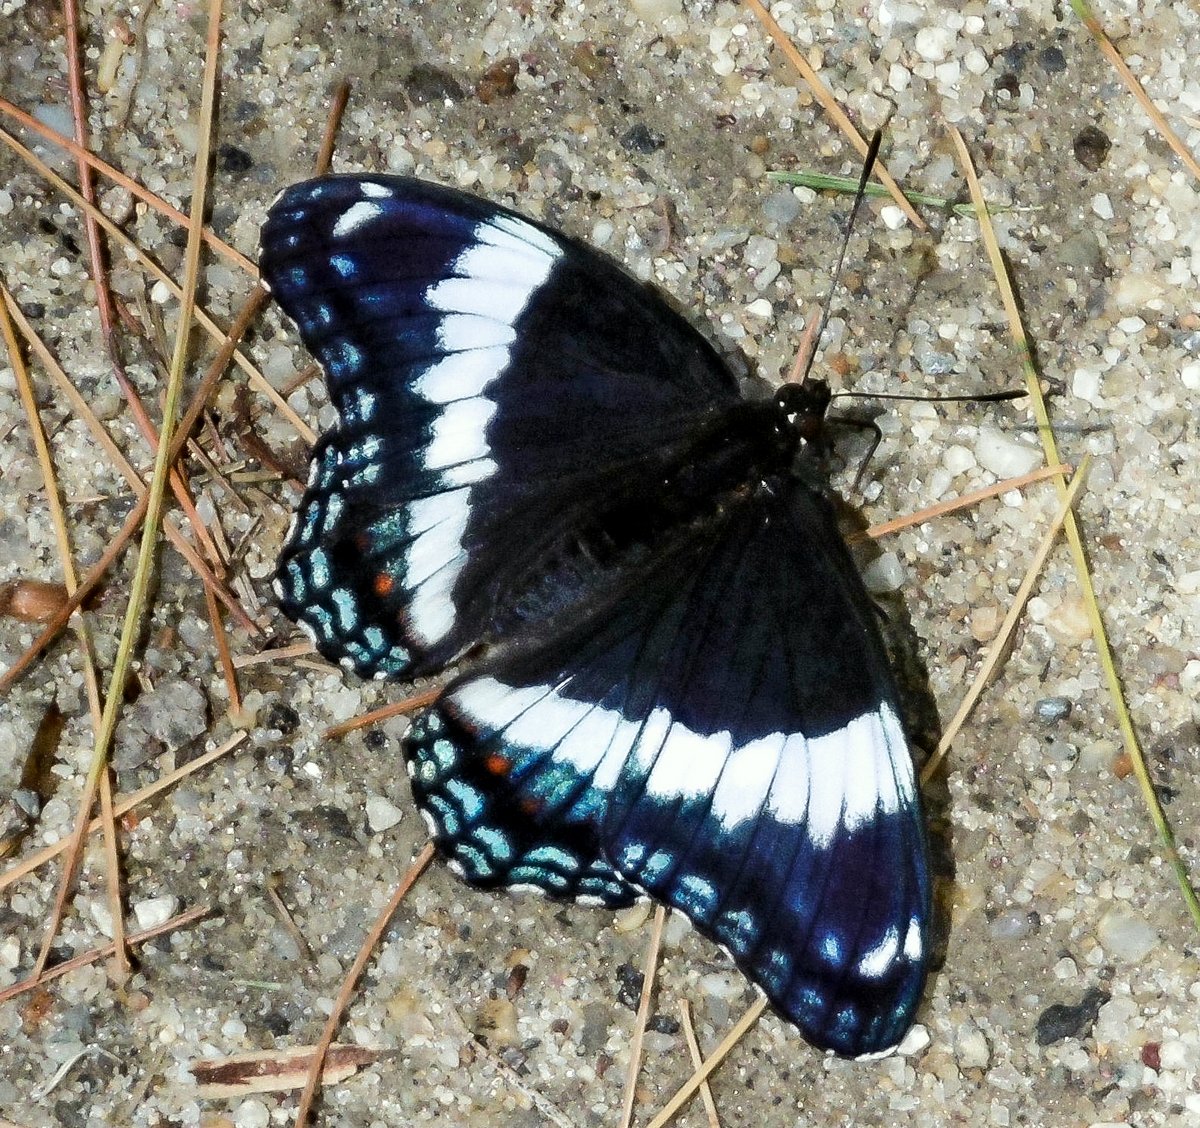 17. White Admiral Butterfly